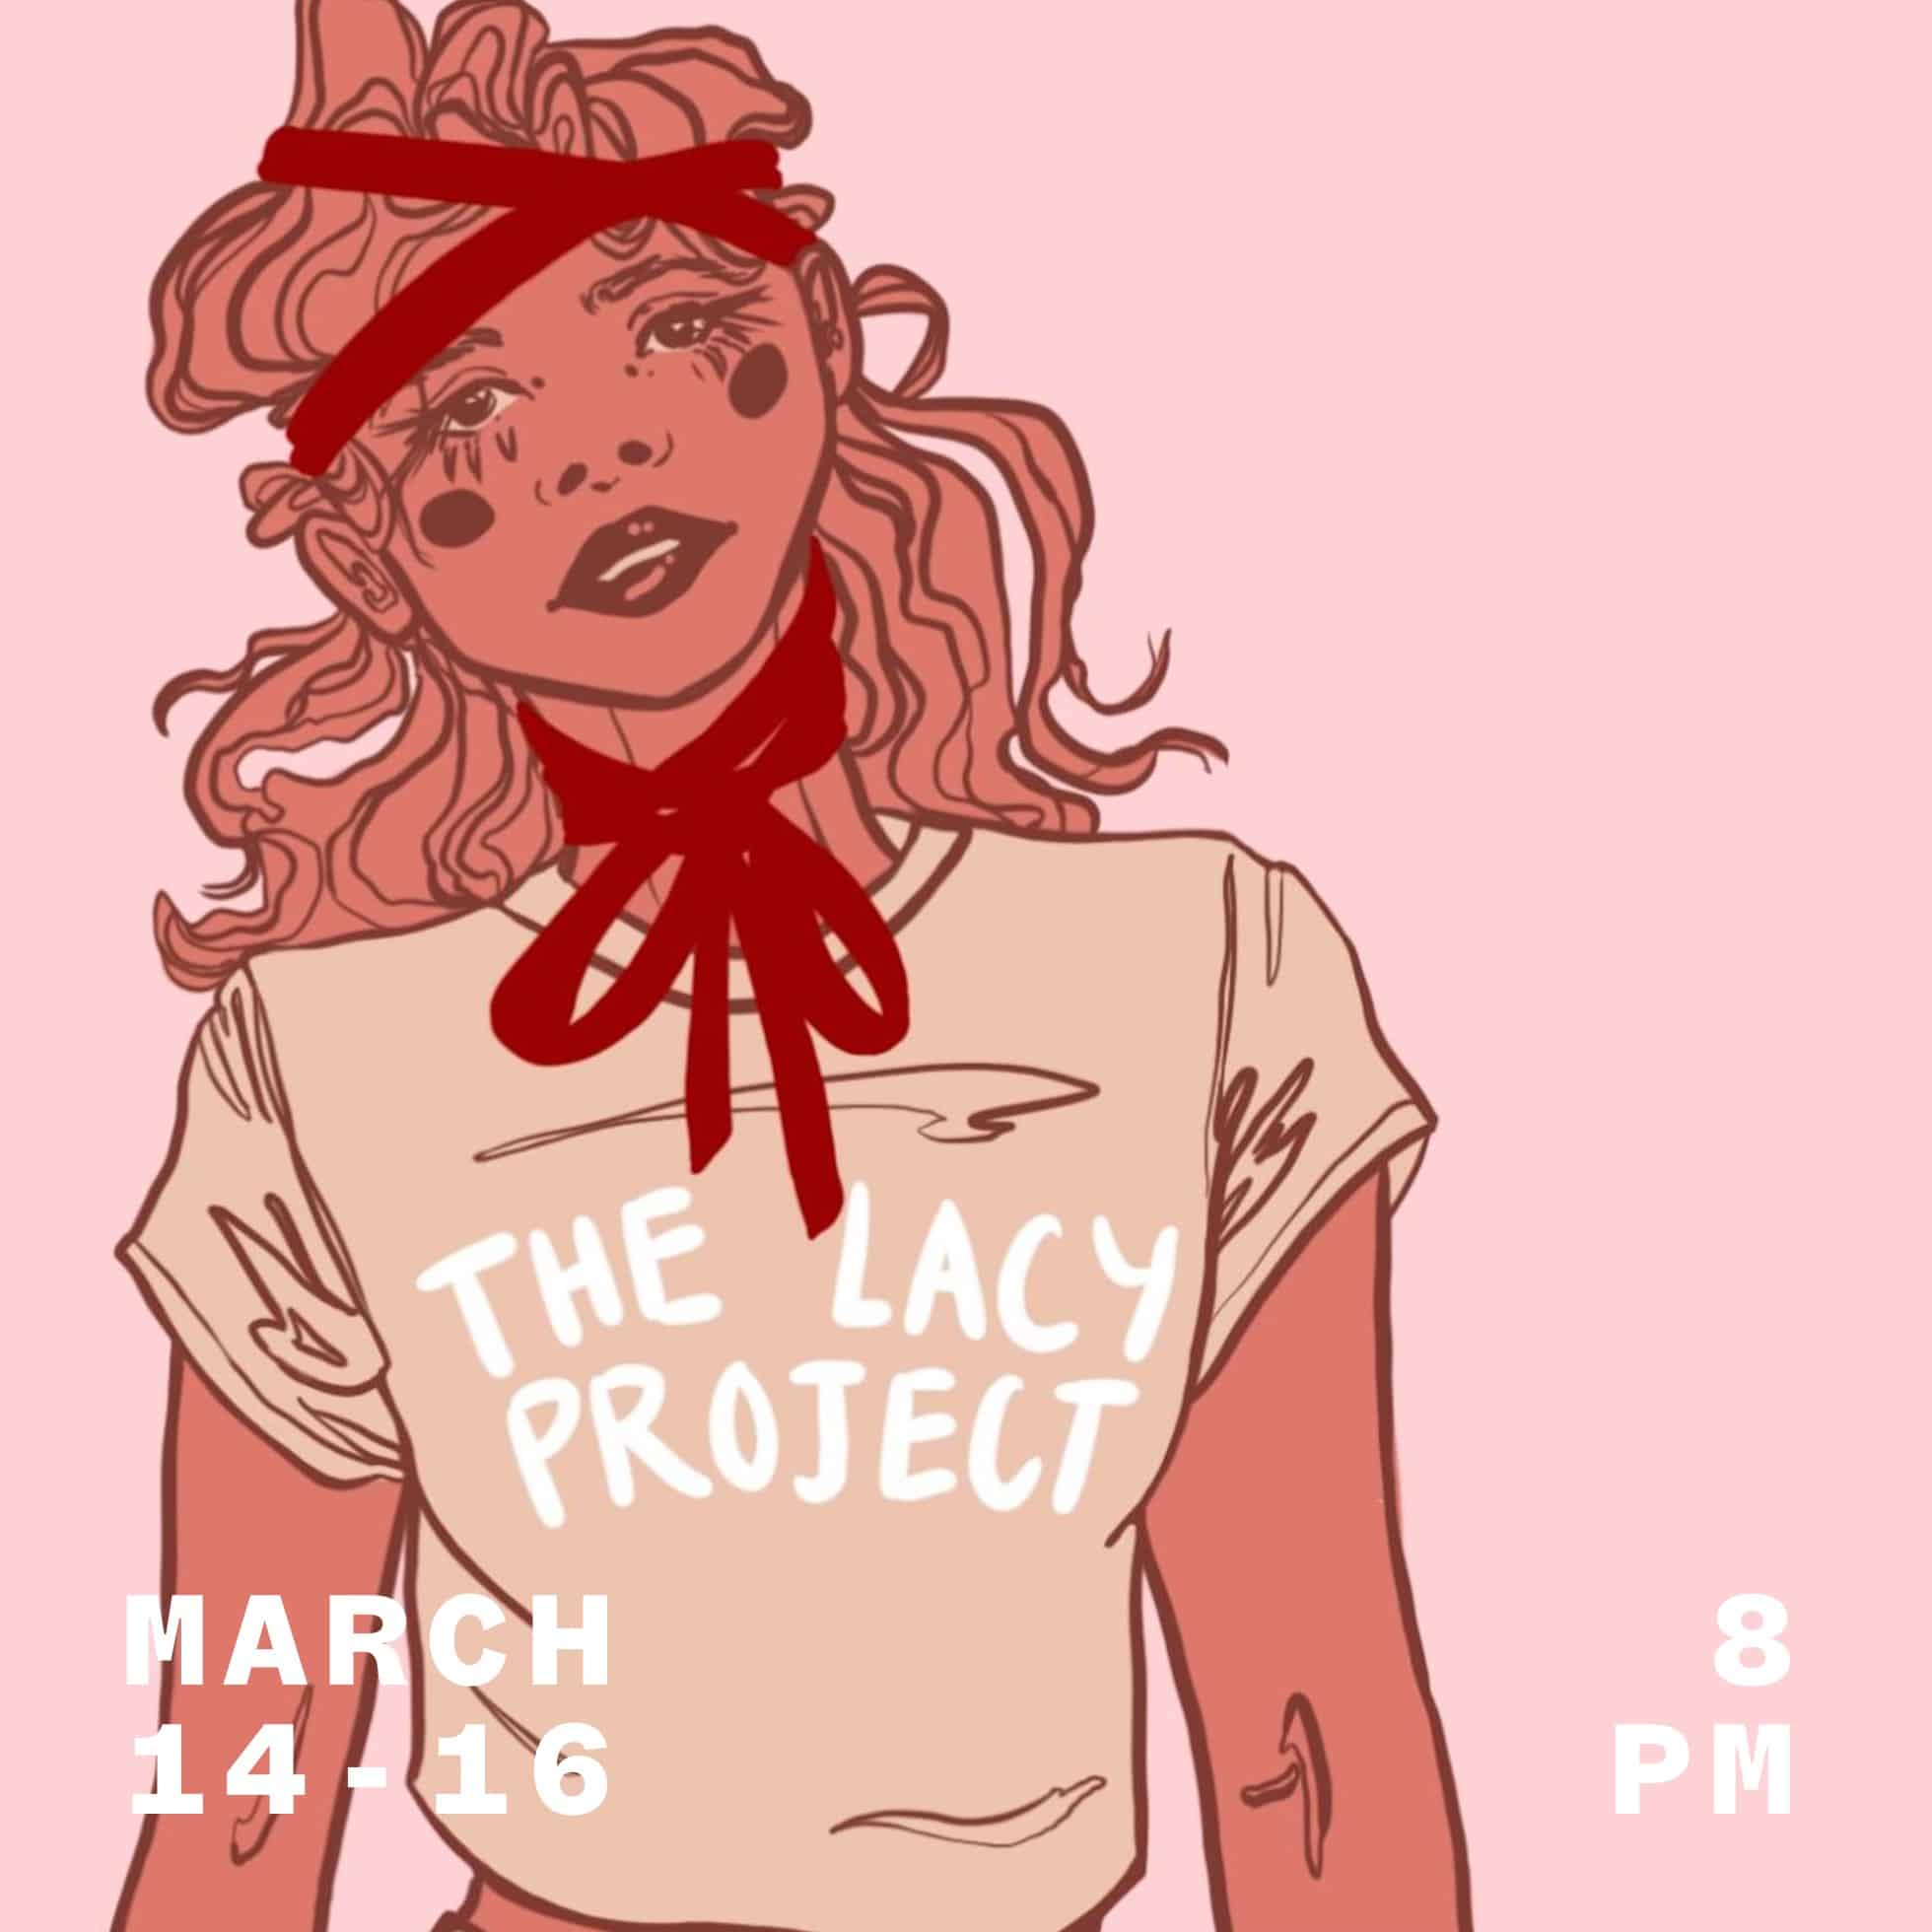 THE LACY PROJECT by Alena Smith